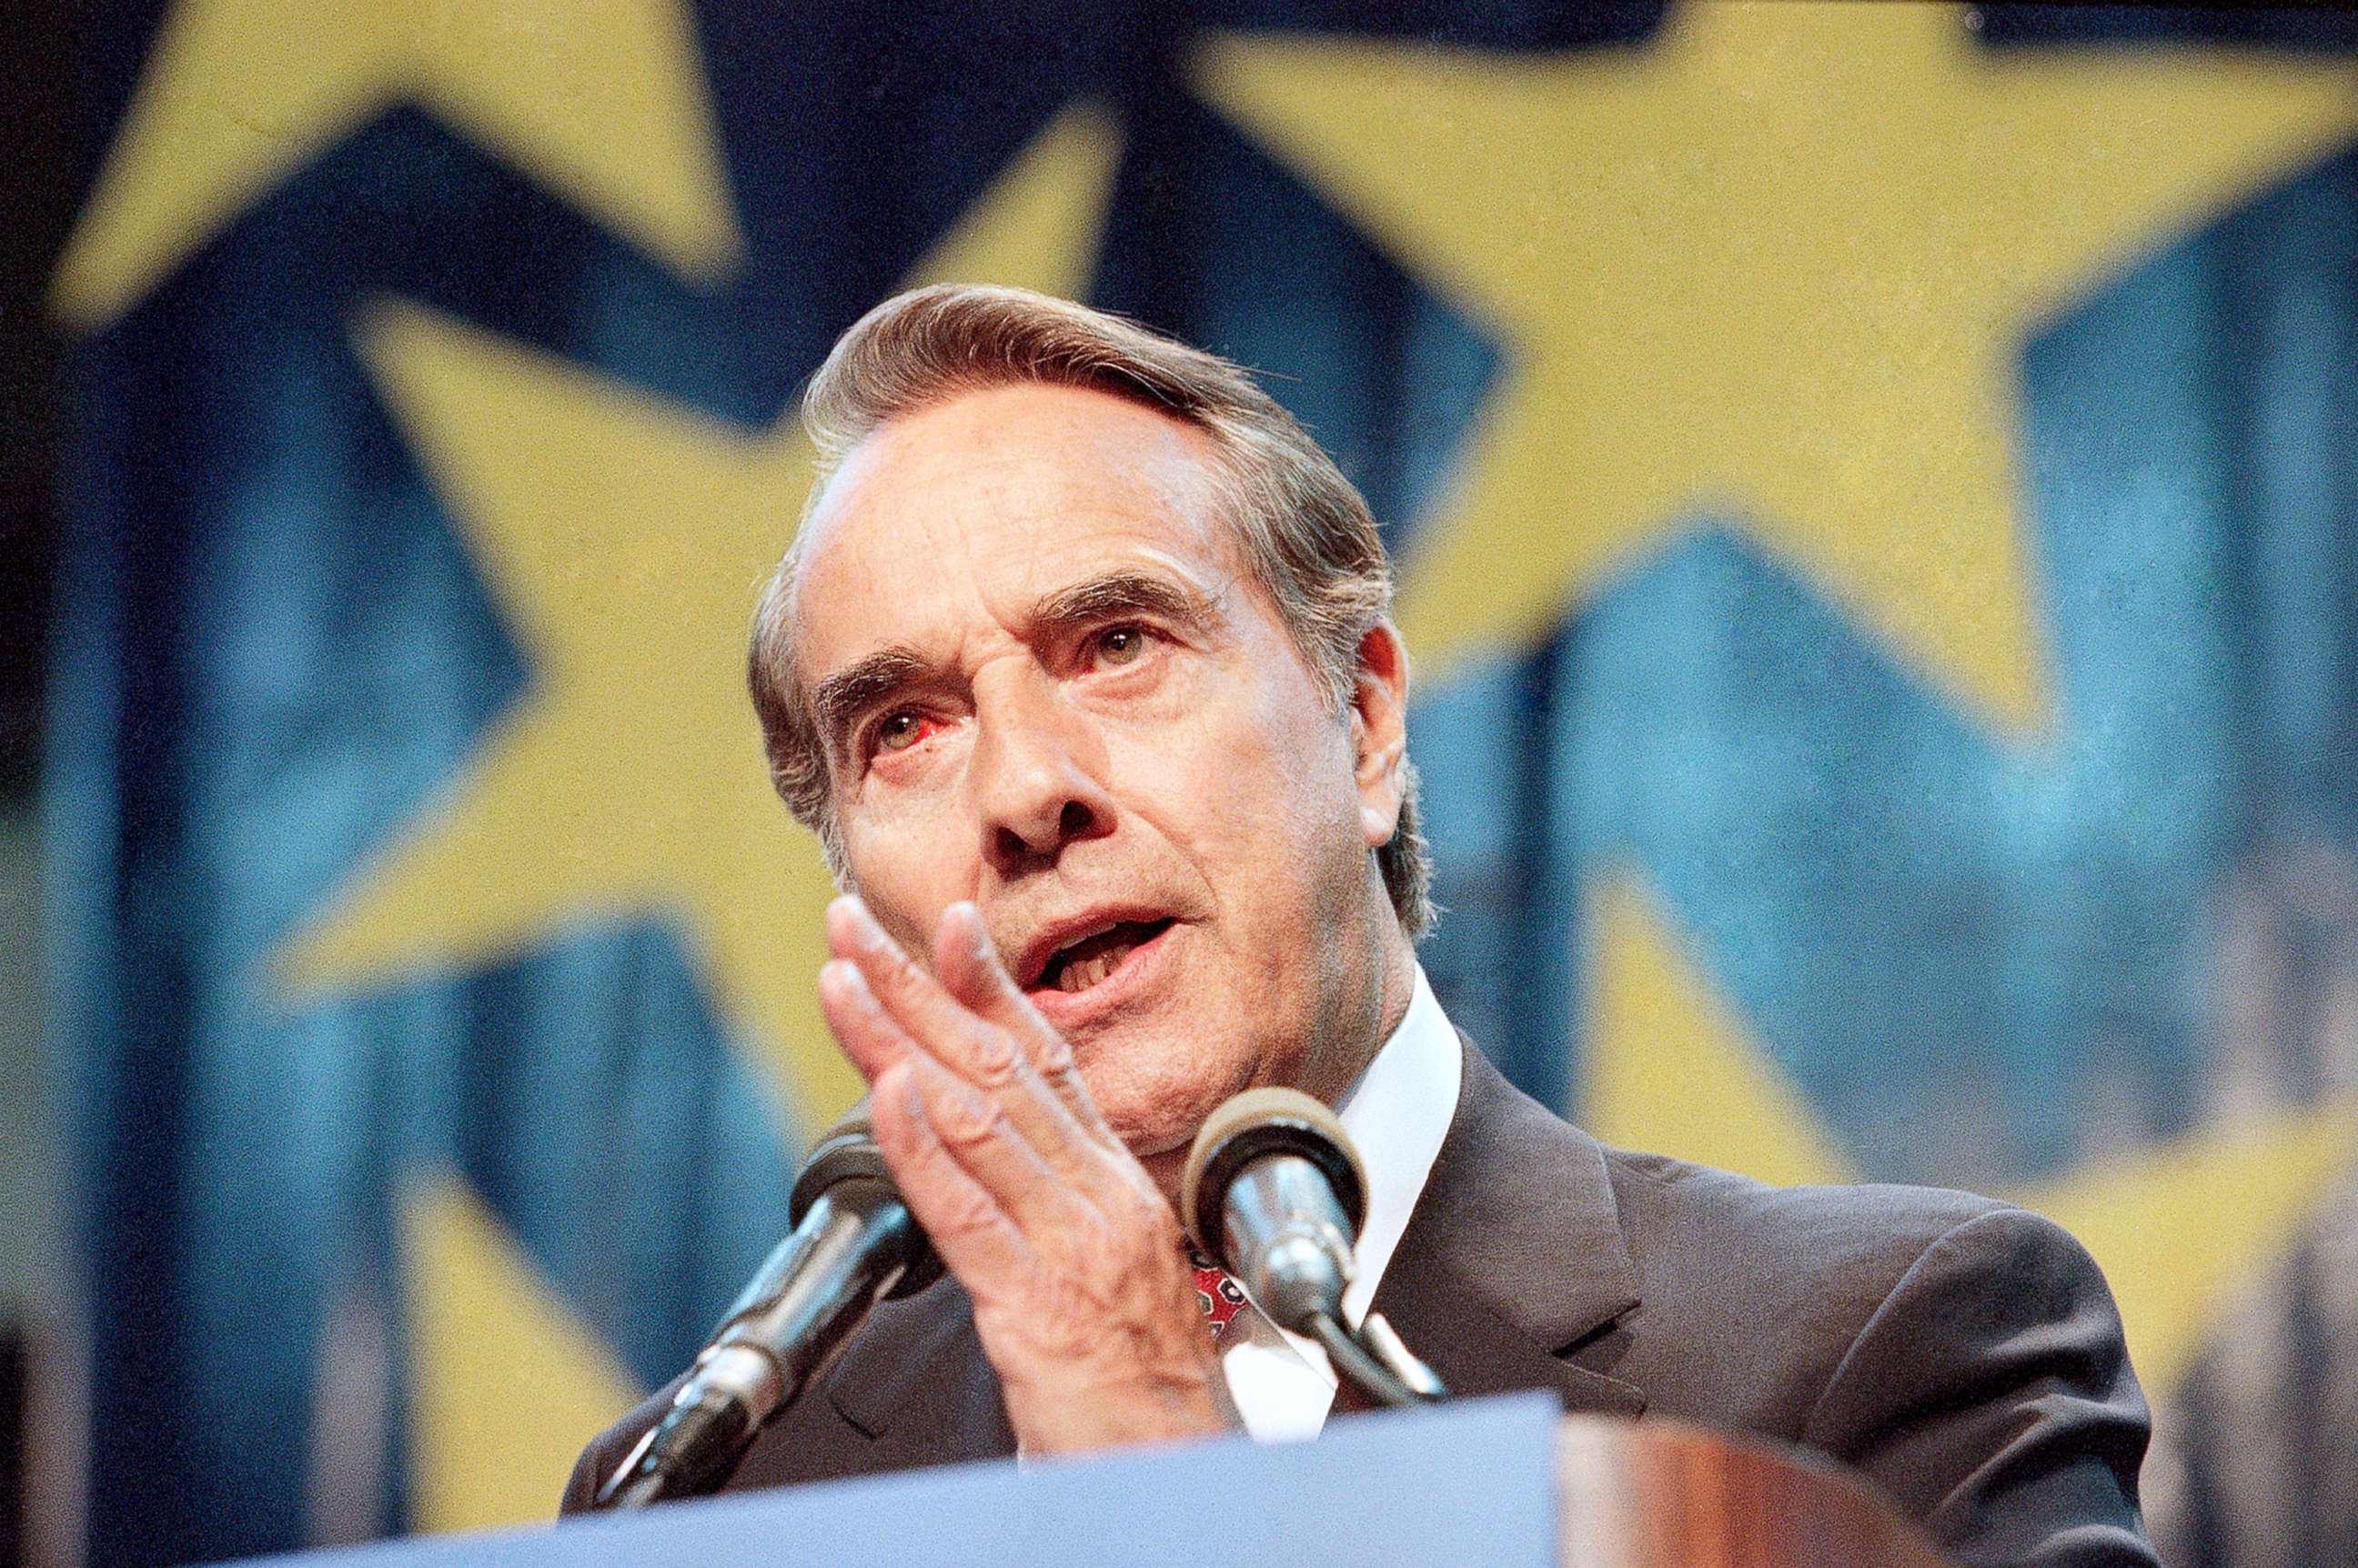 PHOTO: Sen. Bob Dole makes a speech to supporters in Topeka, Kan., April 10, 1995.